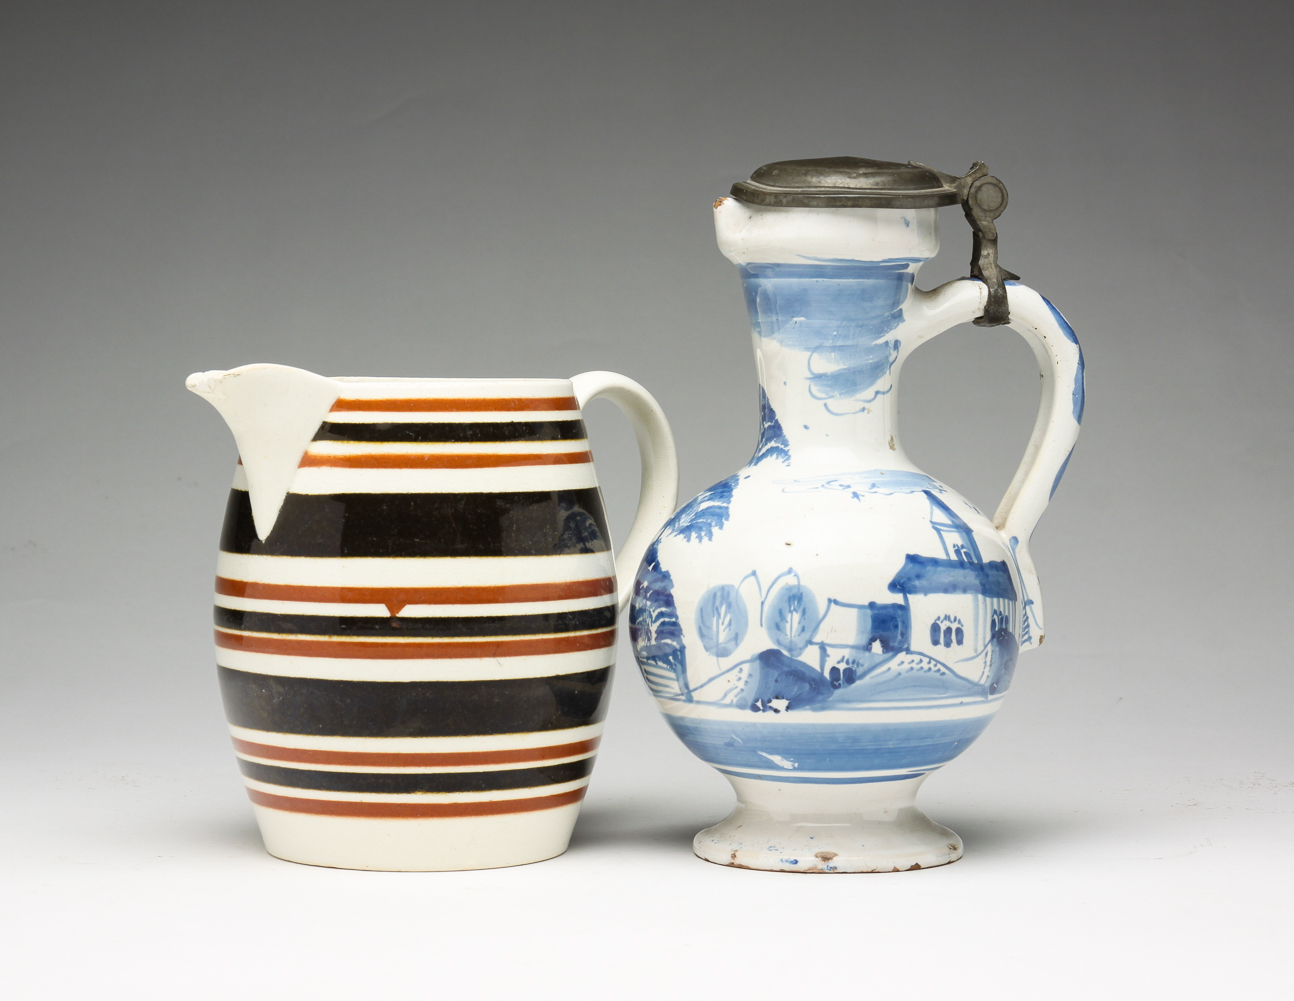 MOCHA PITCHER AND DELFT SYRUPER. Eighteenth-19th